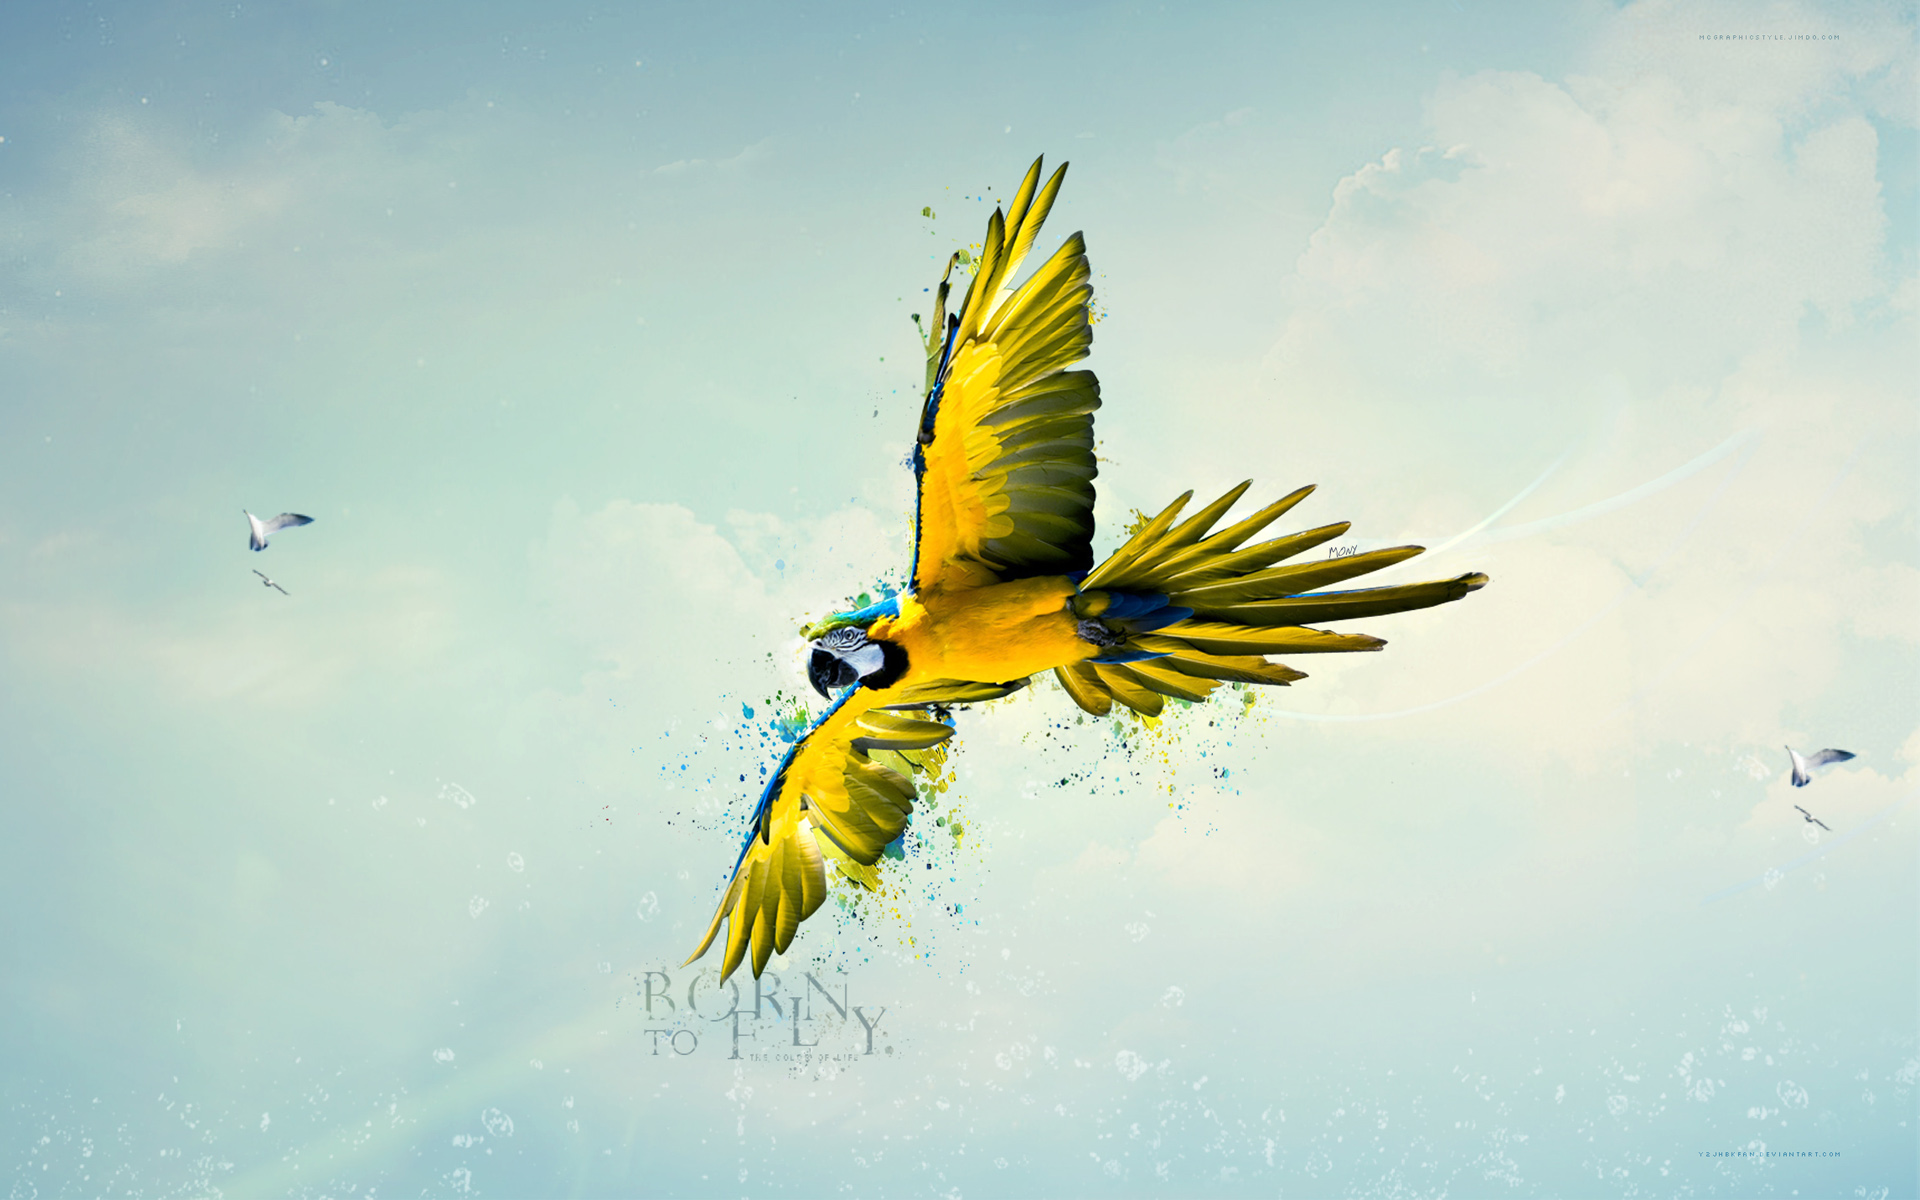 Born To Fly - Wallpaper, High Definition, High Quality, Widescreen